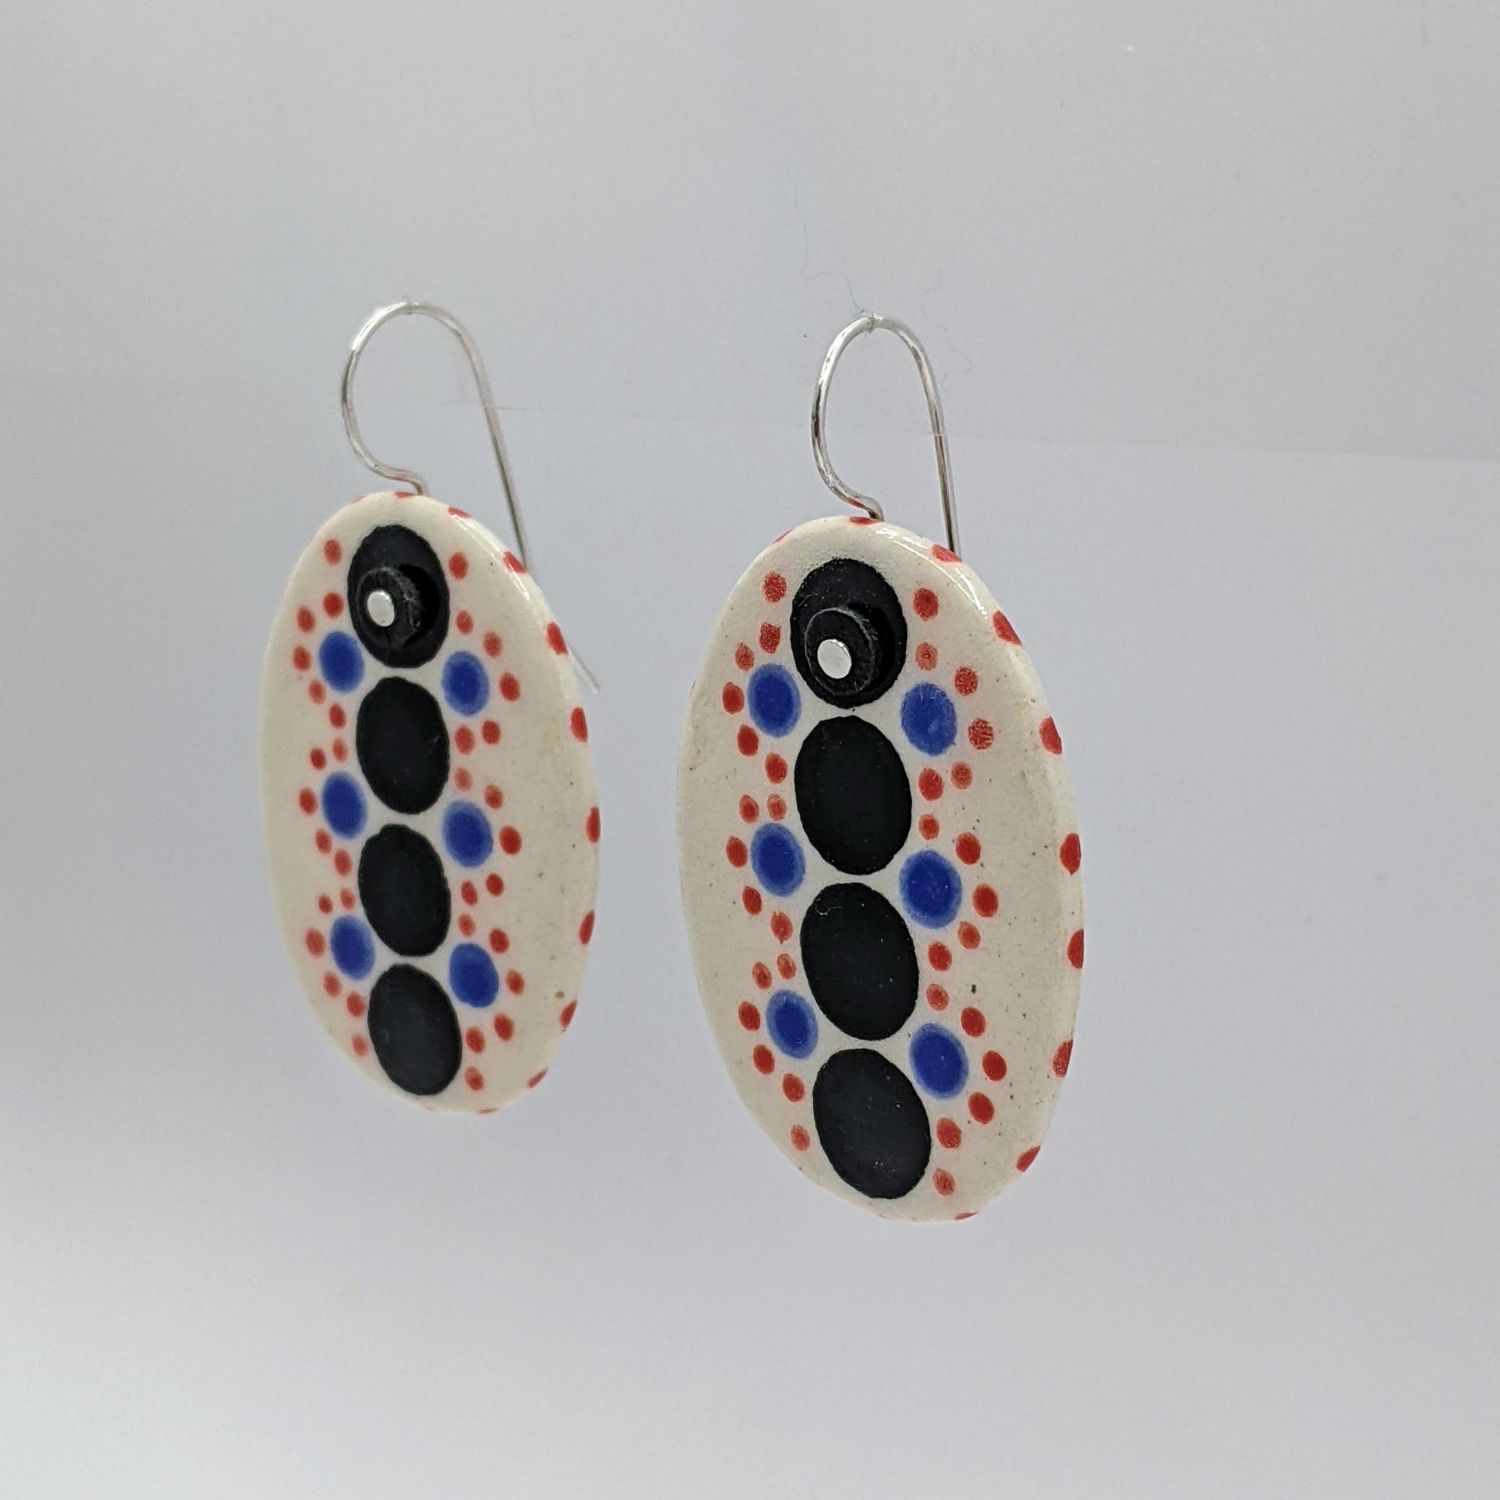 Here and Here: Black and Multi-Coloured Dotted Ceramic Disc Earrings Product Image 3 of 3